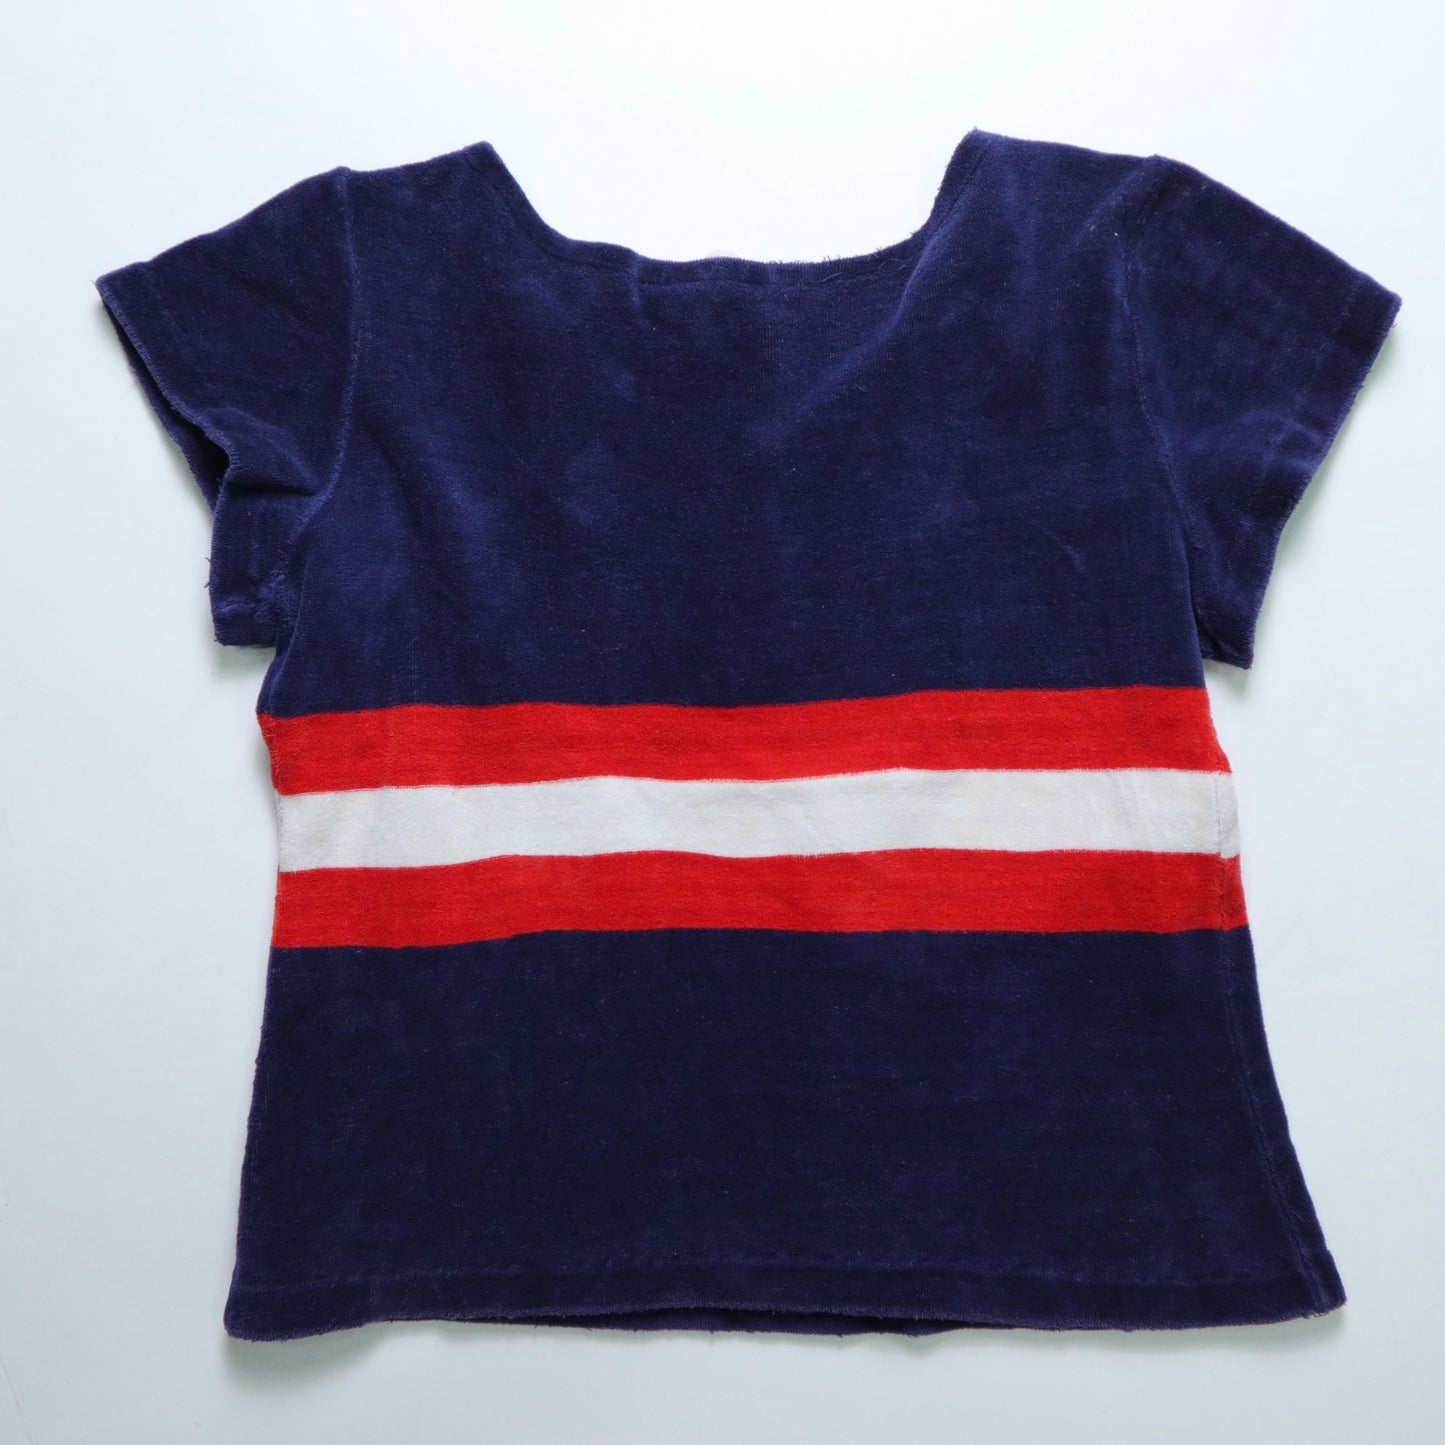 1970s JCPENNEY 藍紅拚色毛巾布上衣 terry cloth